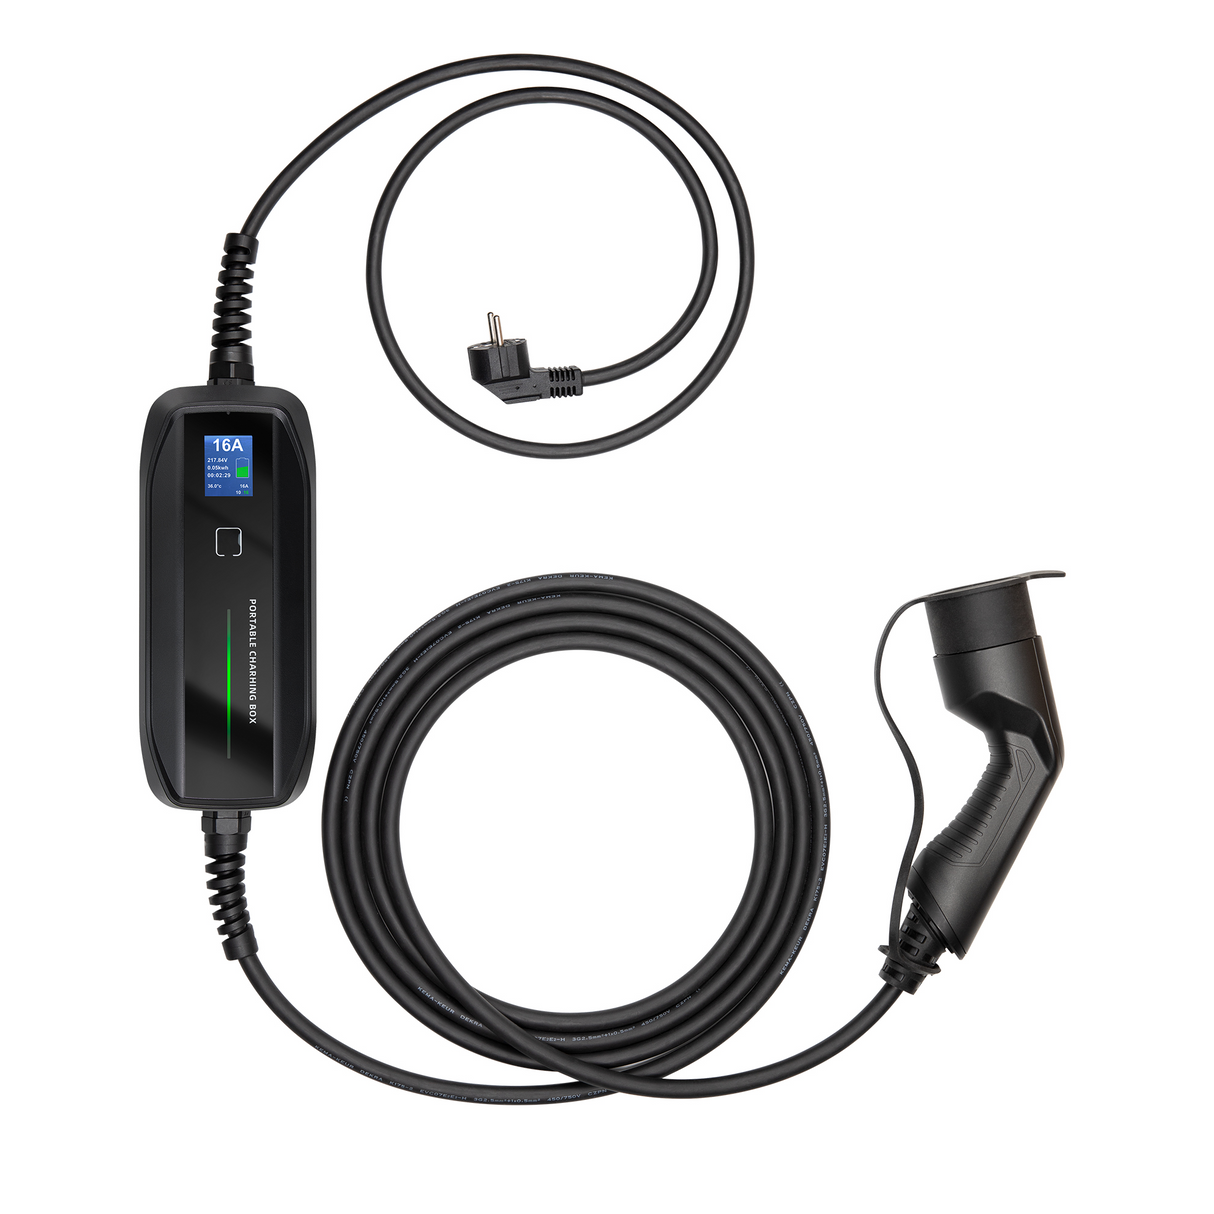 Mobile Charger Jaguar I-Pace - Besen with LCD - Type 2 to Schuko